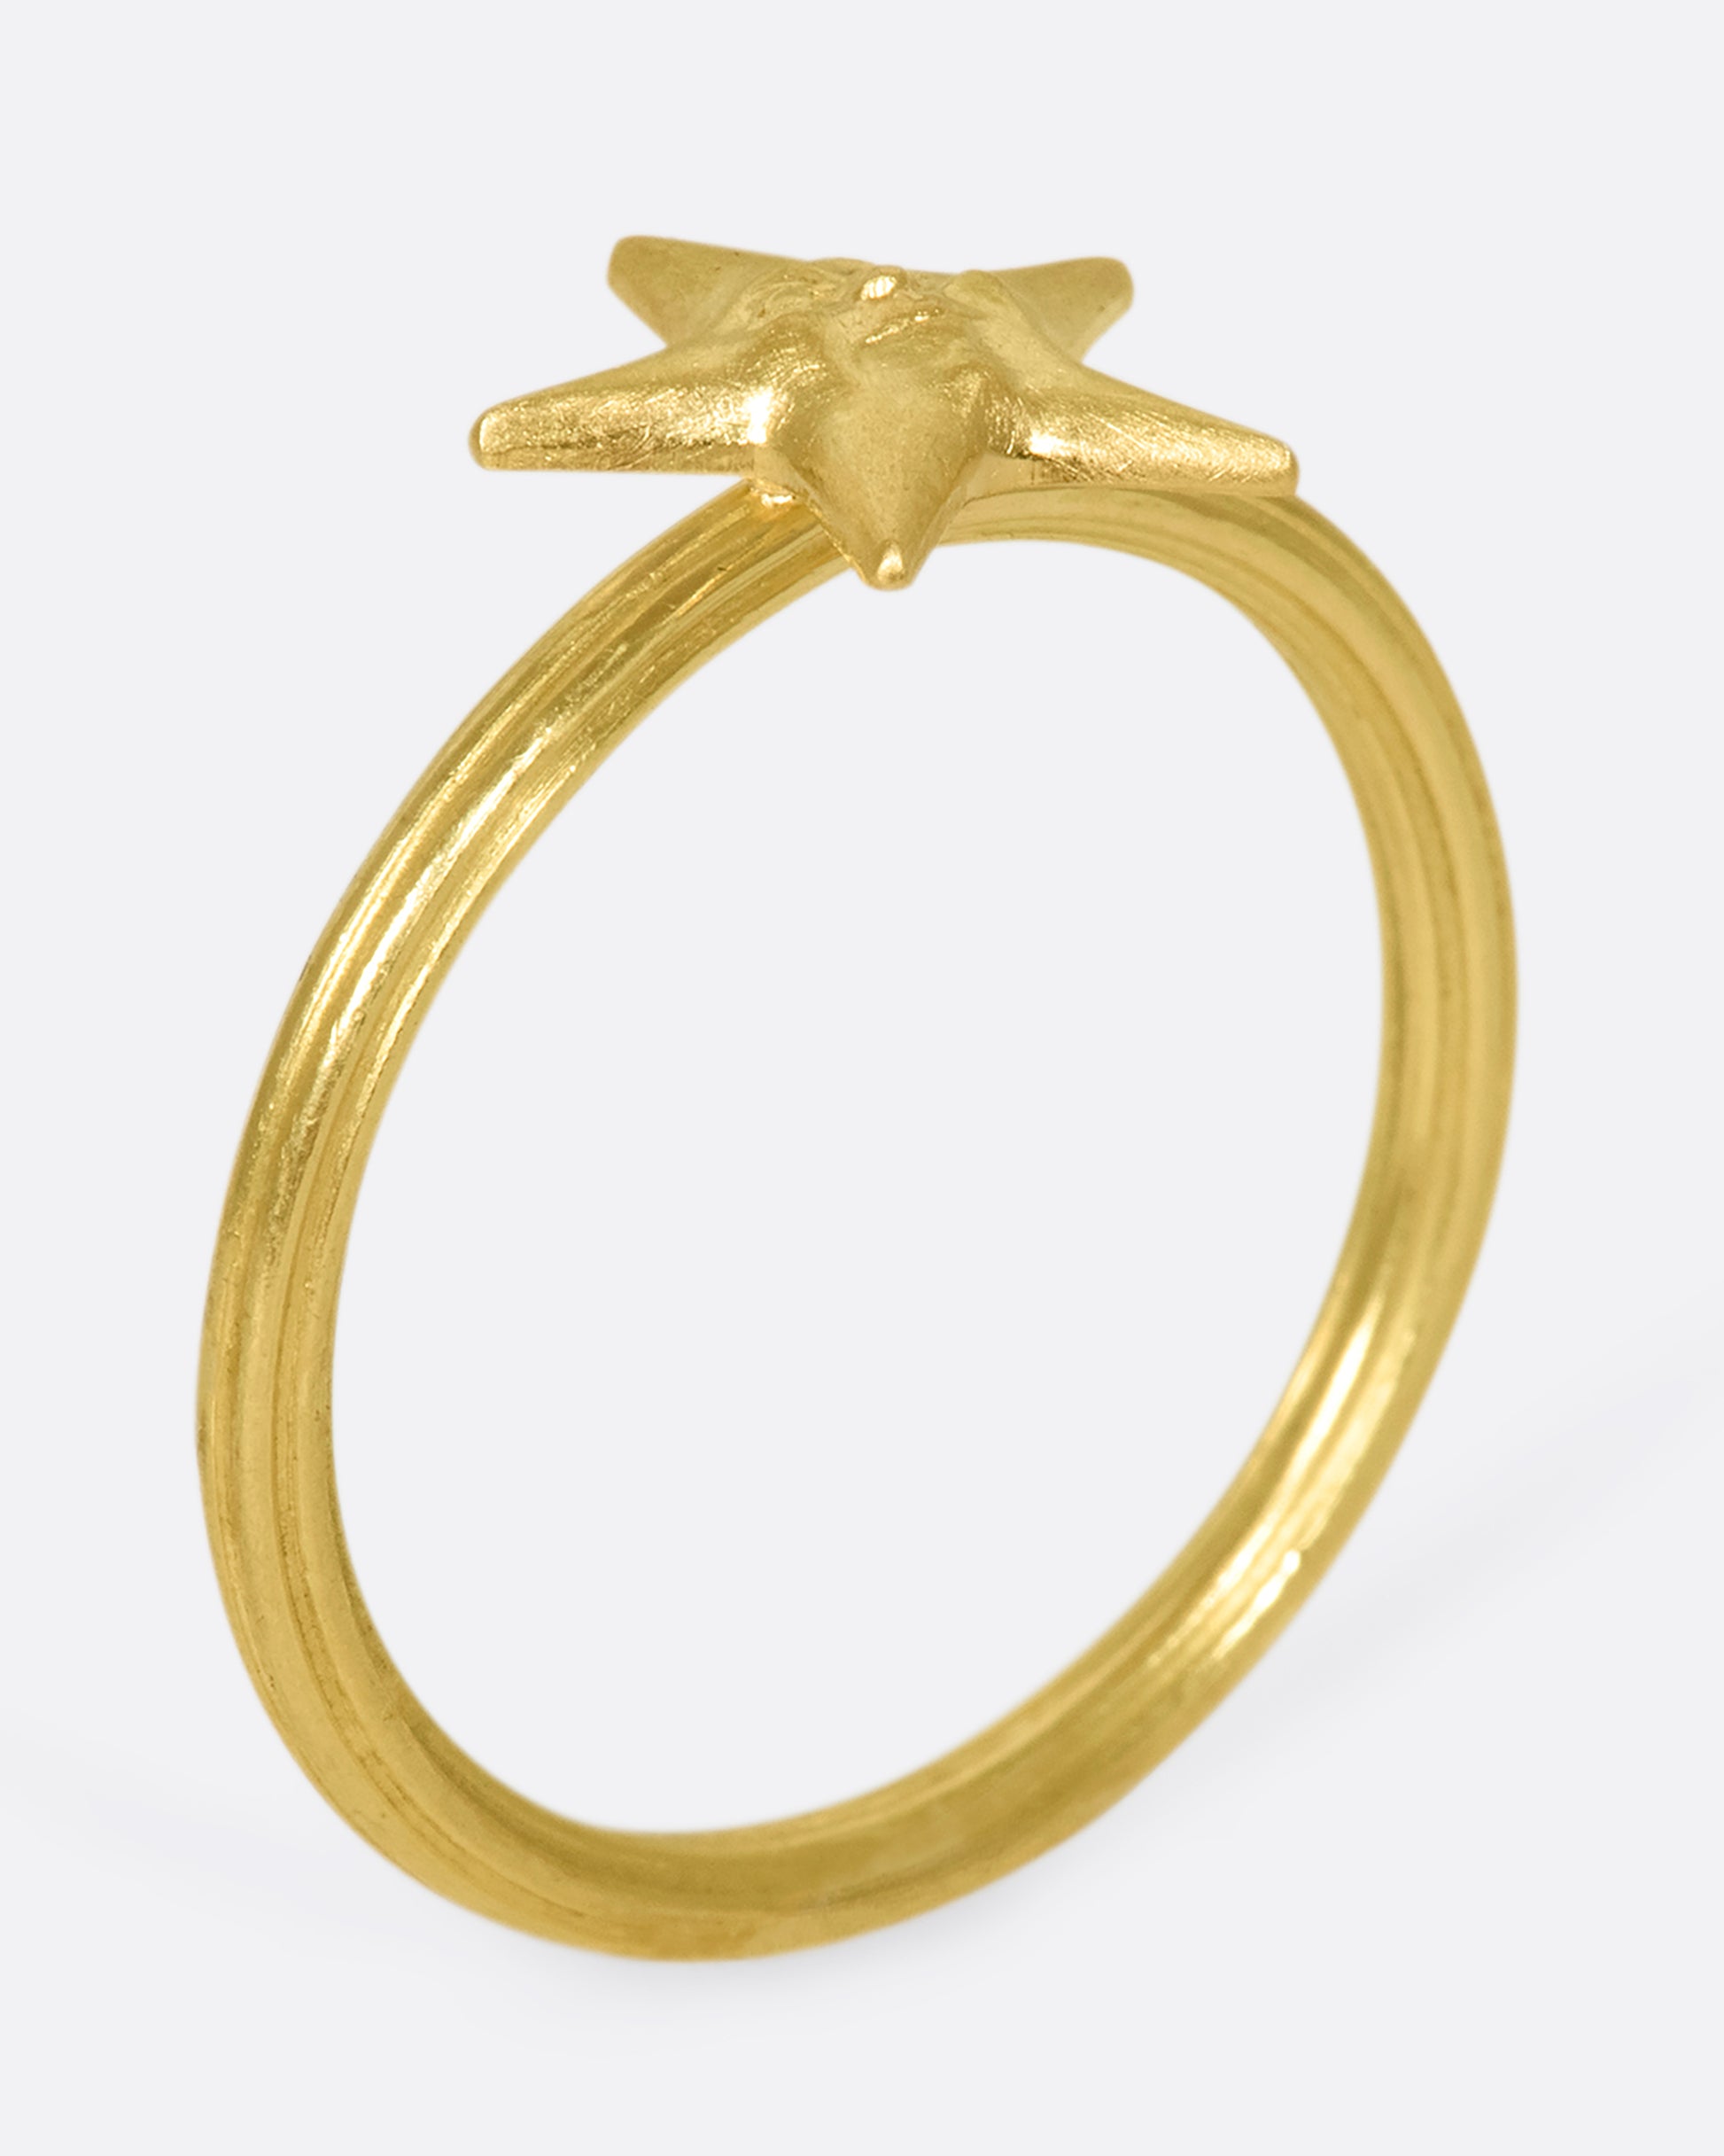 An 18k gold star ring with a sweet face emerging in the center.